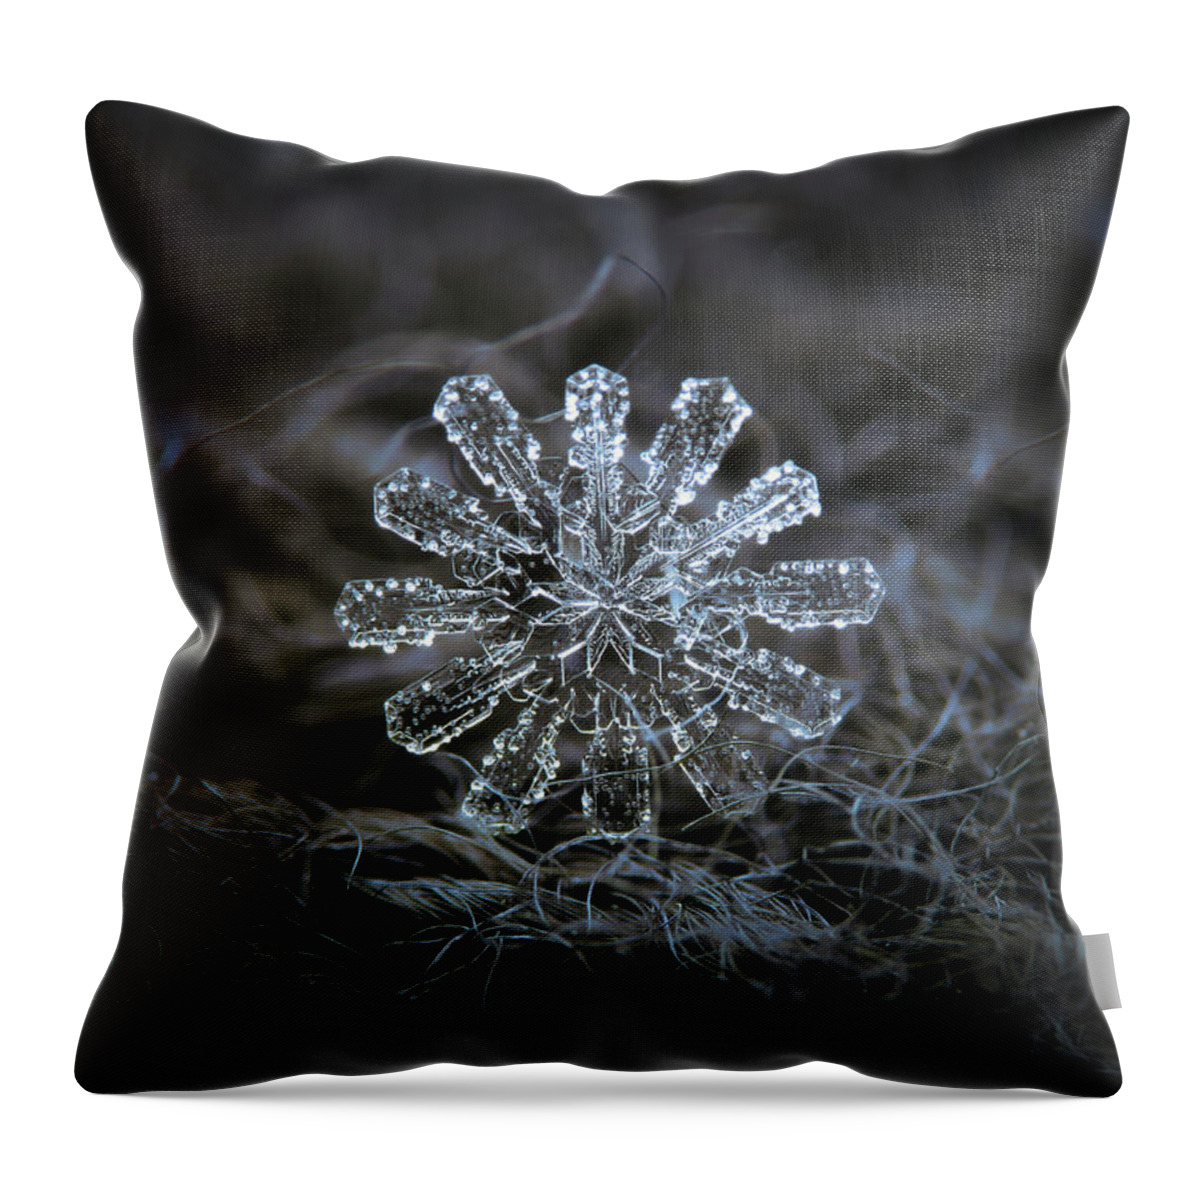 Snowflake Throw Pillow featuring the photograph December 18 2015 - snowflake 3 by Alexey Kljatov